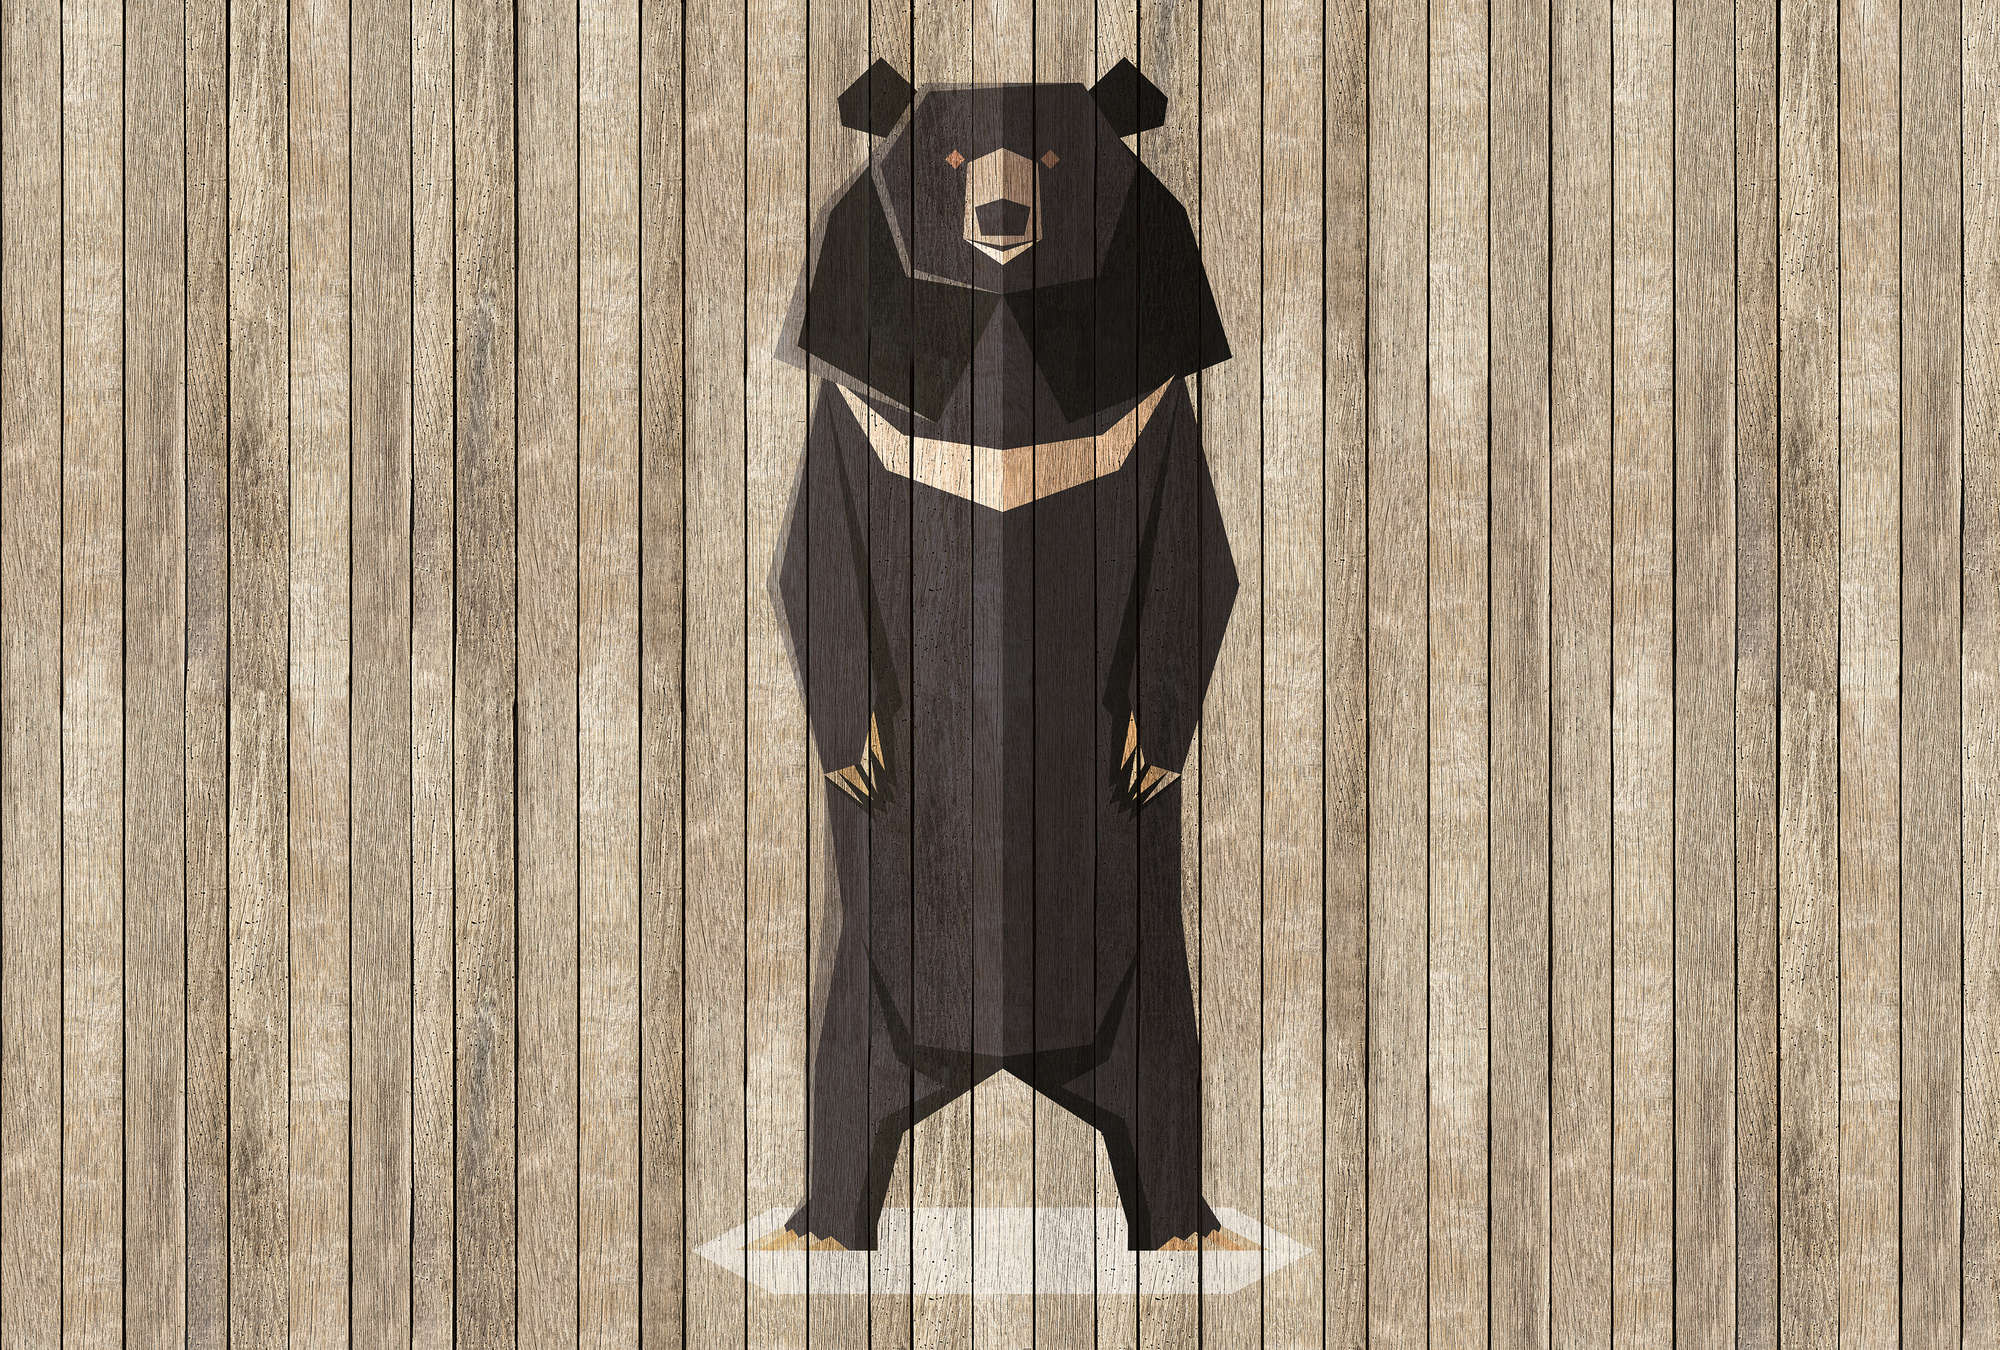             Born to Be Wild 1 - Board Wall Wallpaper with Bears - Wooden Panels Wide - Beige, Brown | Textured Non-woven
        